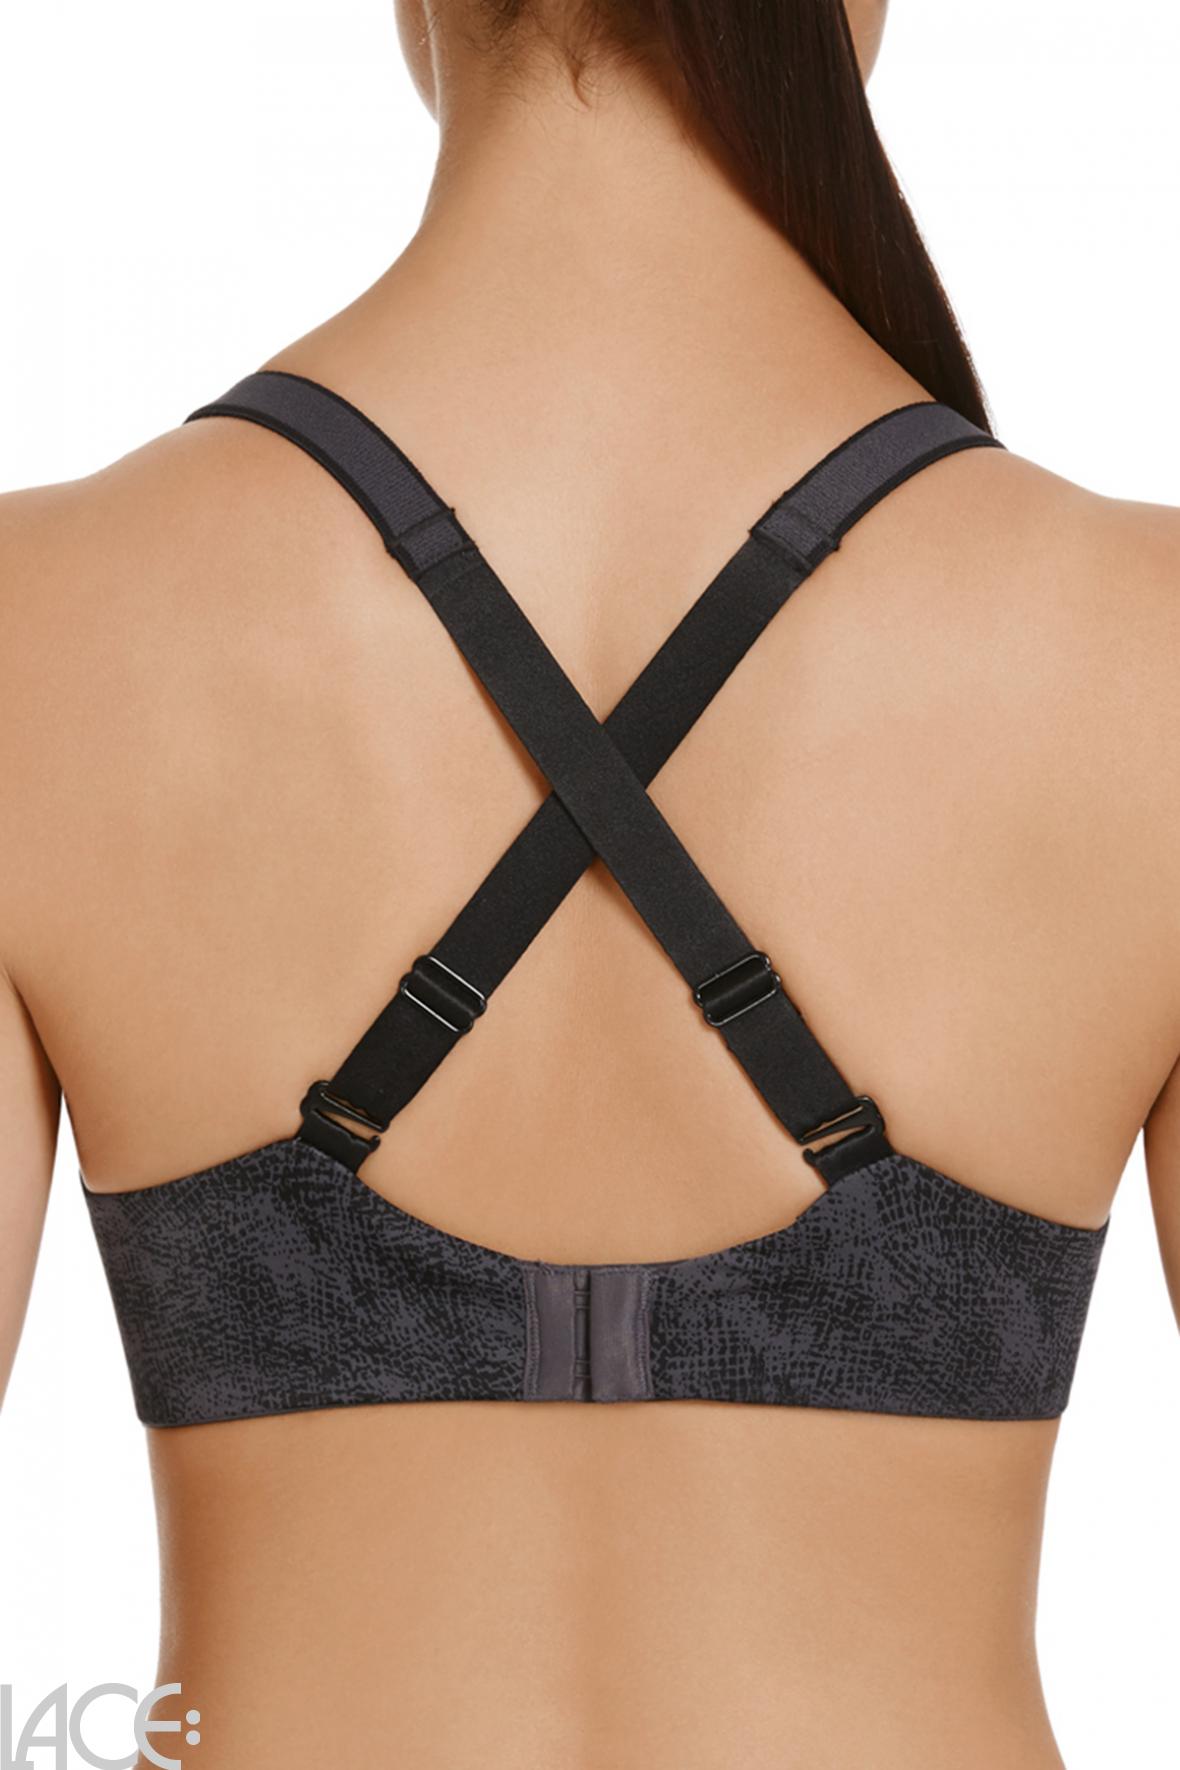 Berlei High Performance Underwired Sports bra E-G cup – Lace